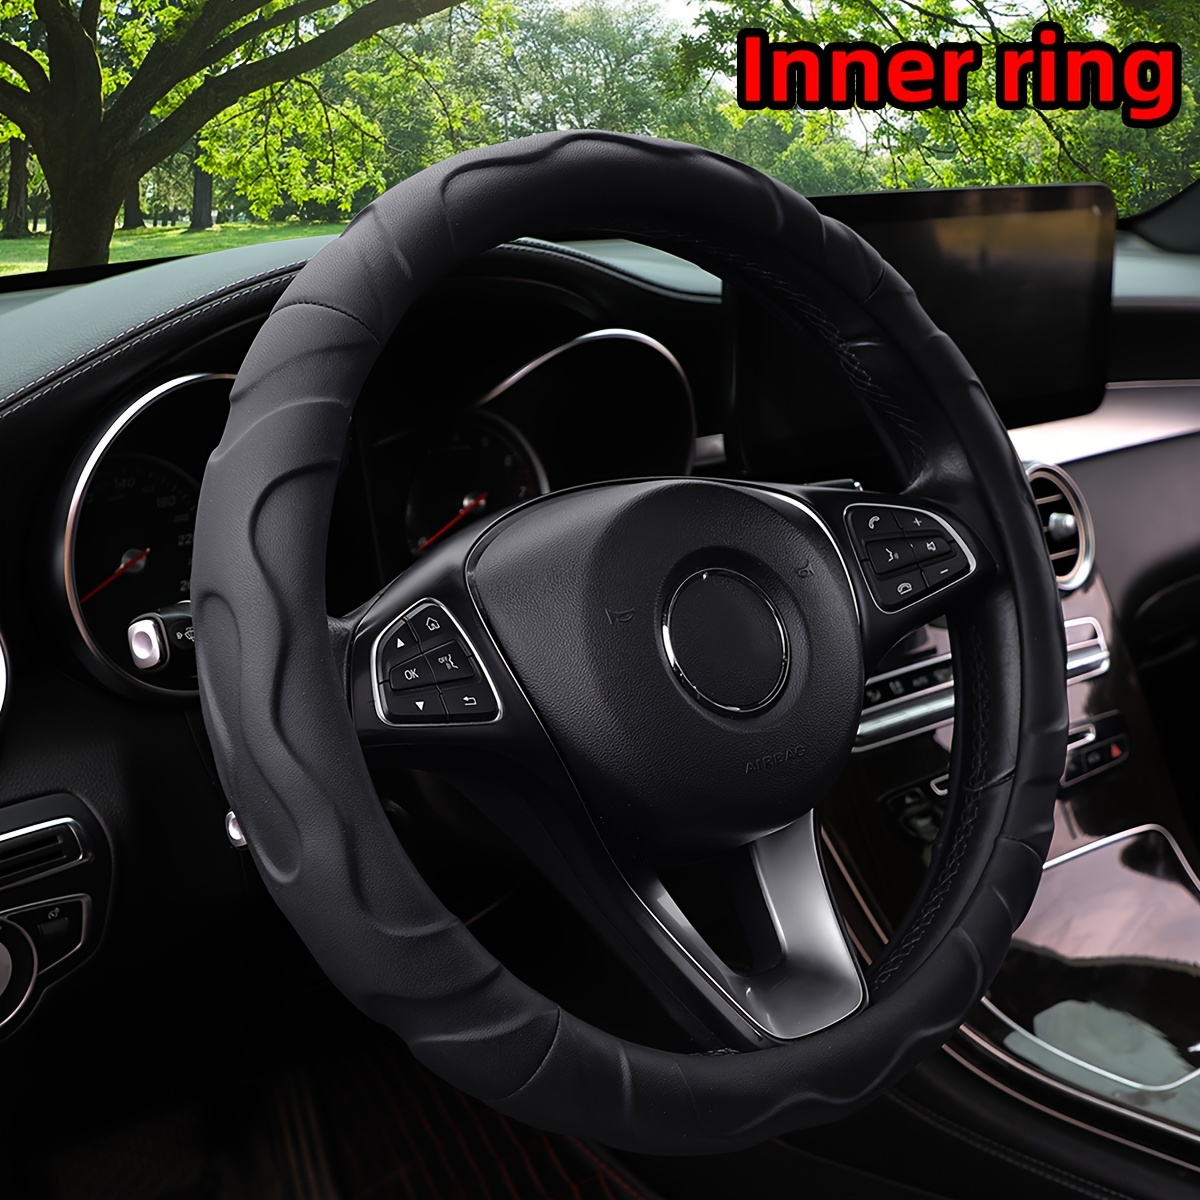 

Premium Faux Lambskin Steering Wheel Cover - Fit For 14.5-15" (37-38cm) Sports Cars, Durable Pu Leather With Inner Ring